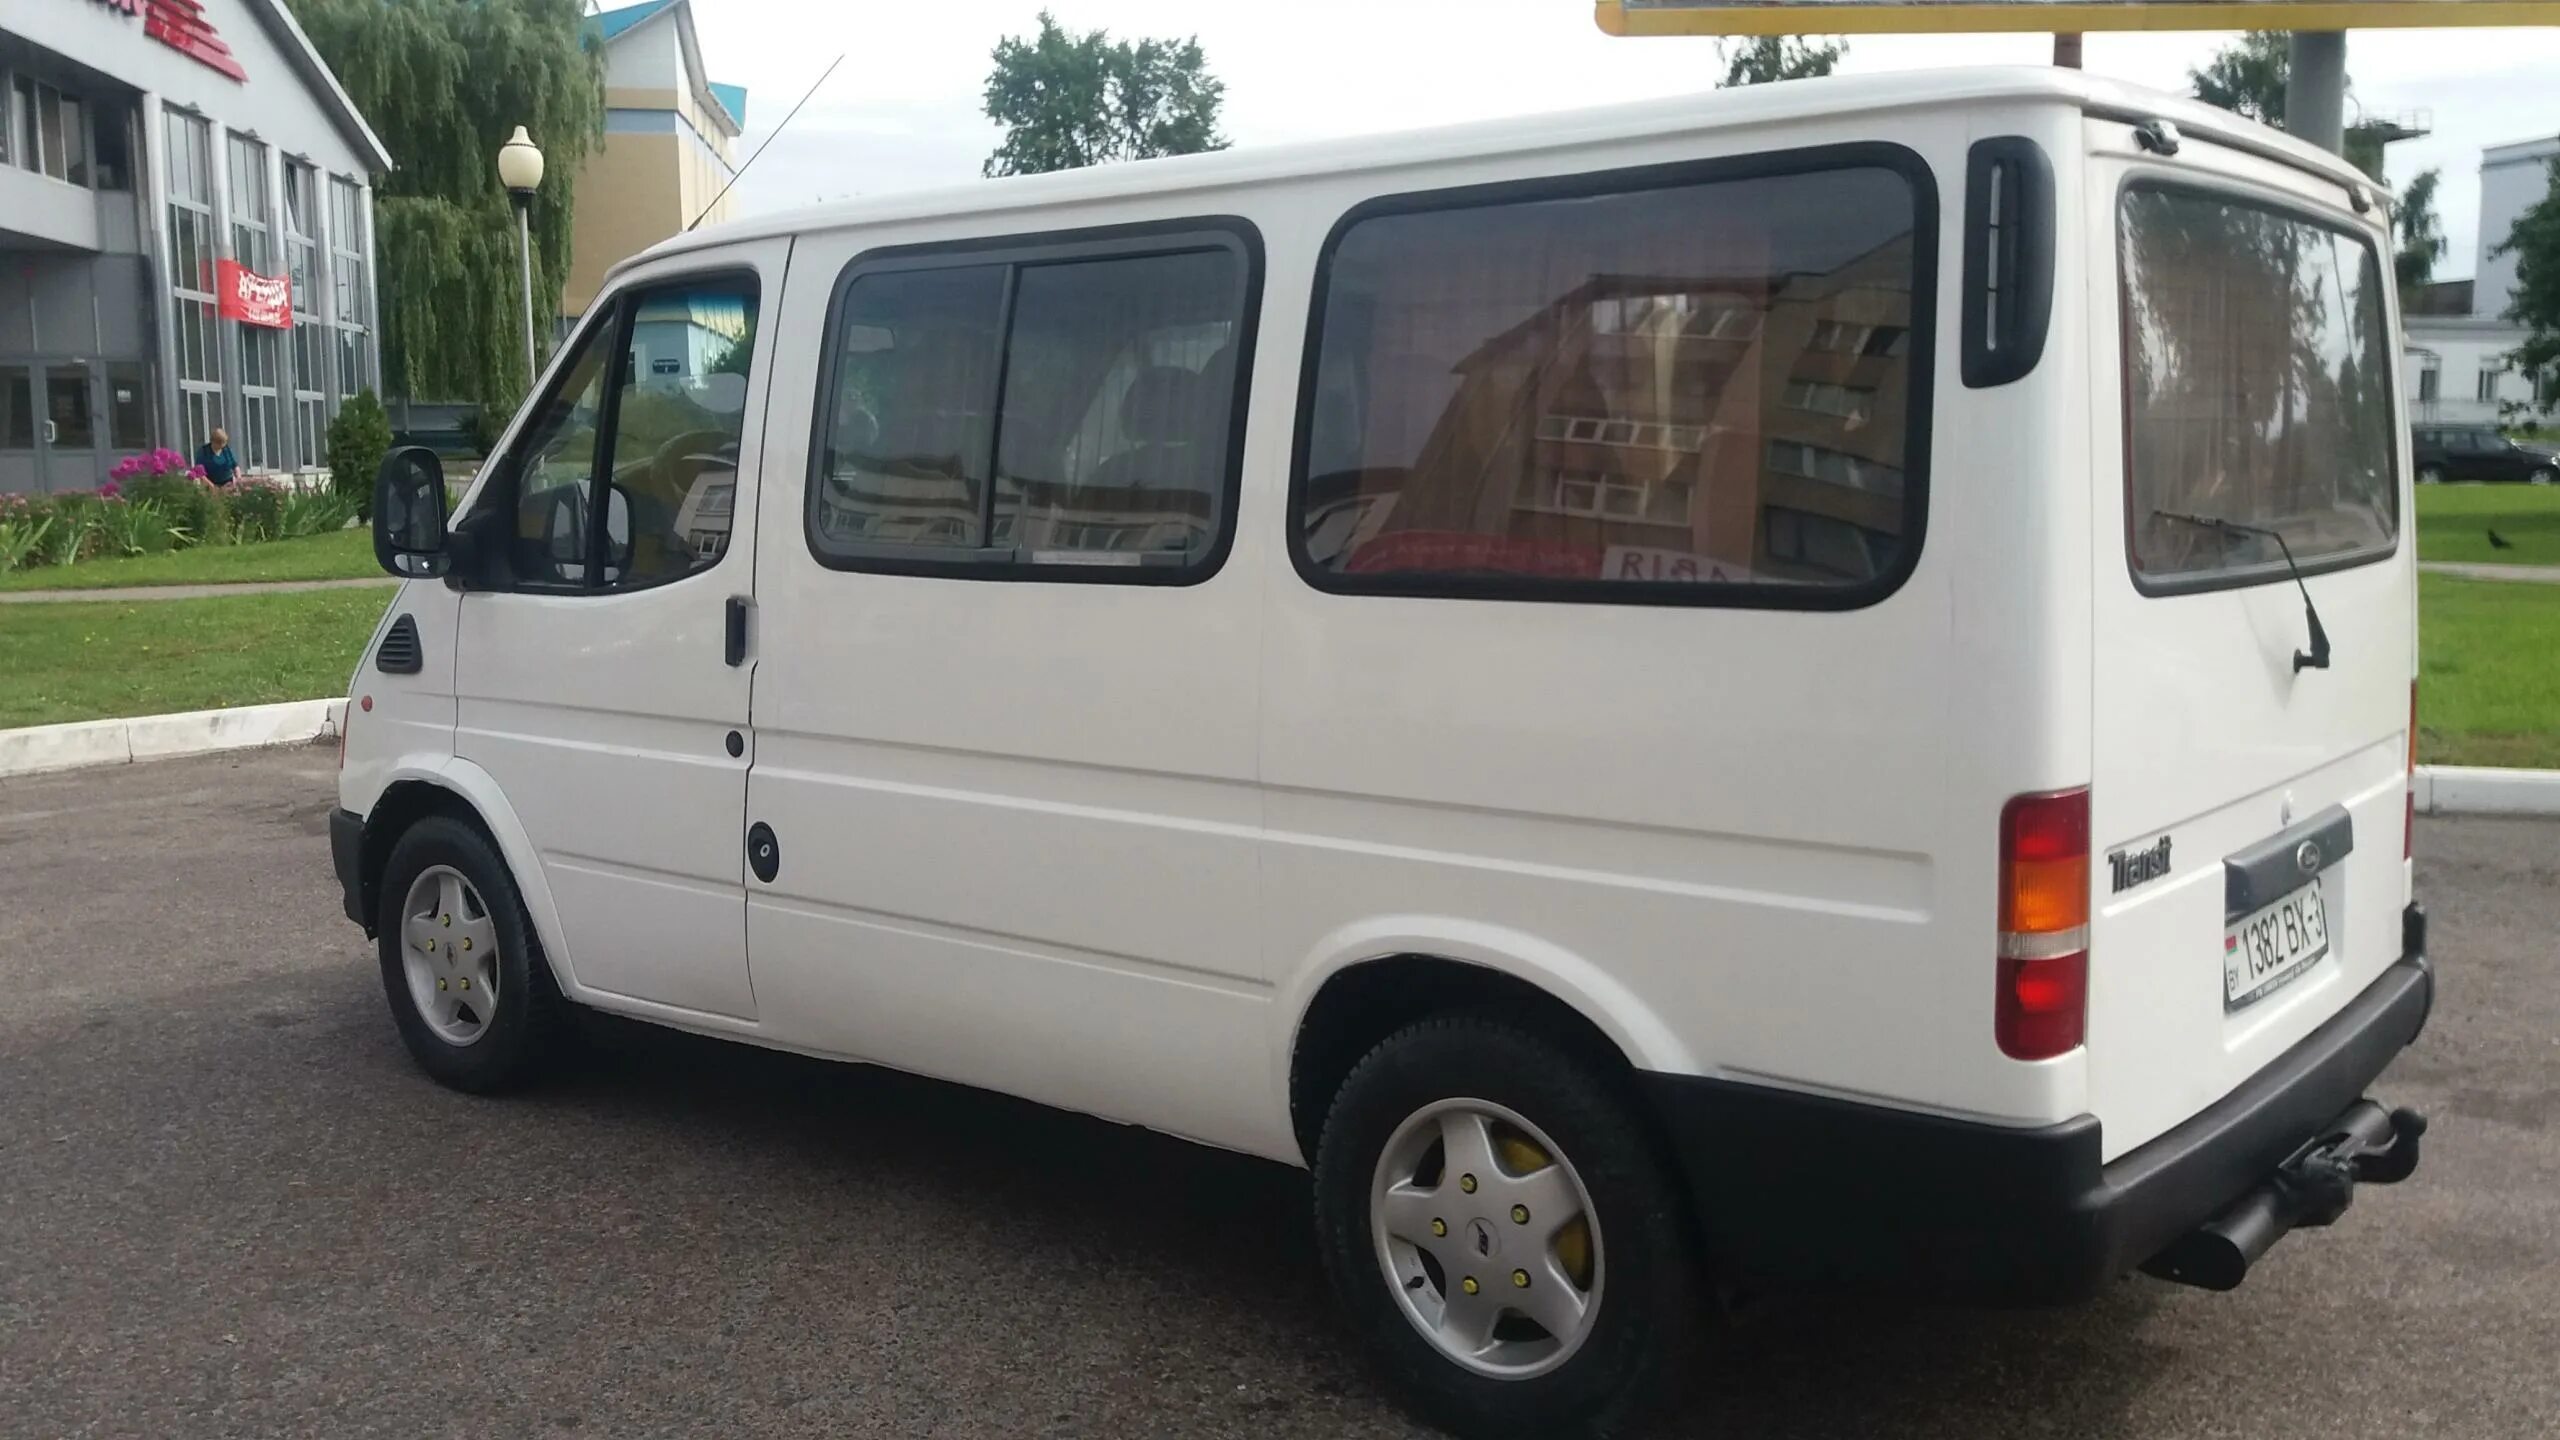 Ford Transit 1994-2000. Форд Транзит 2000г. Ford Transit микроавтобус, 2000. Ford Transit Ey 1994-2000. Купить форд транзит 2000 года